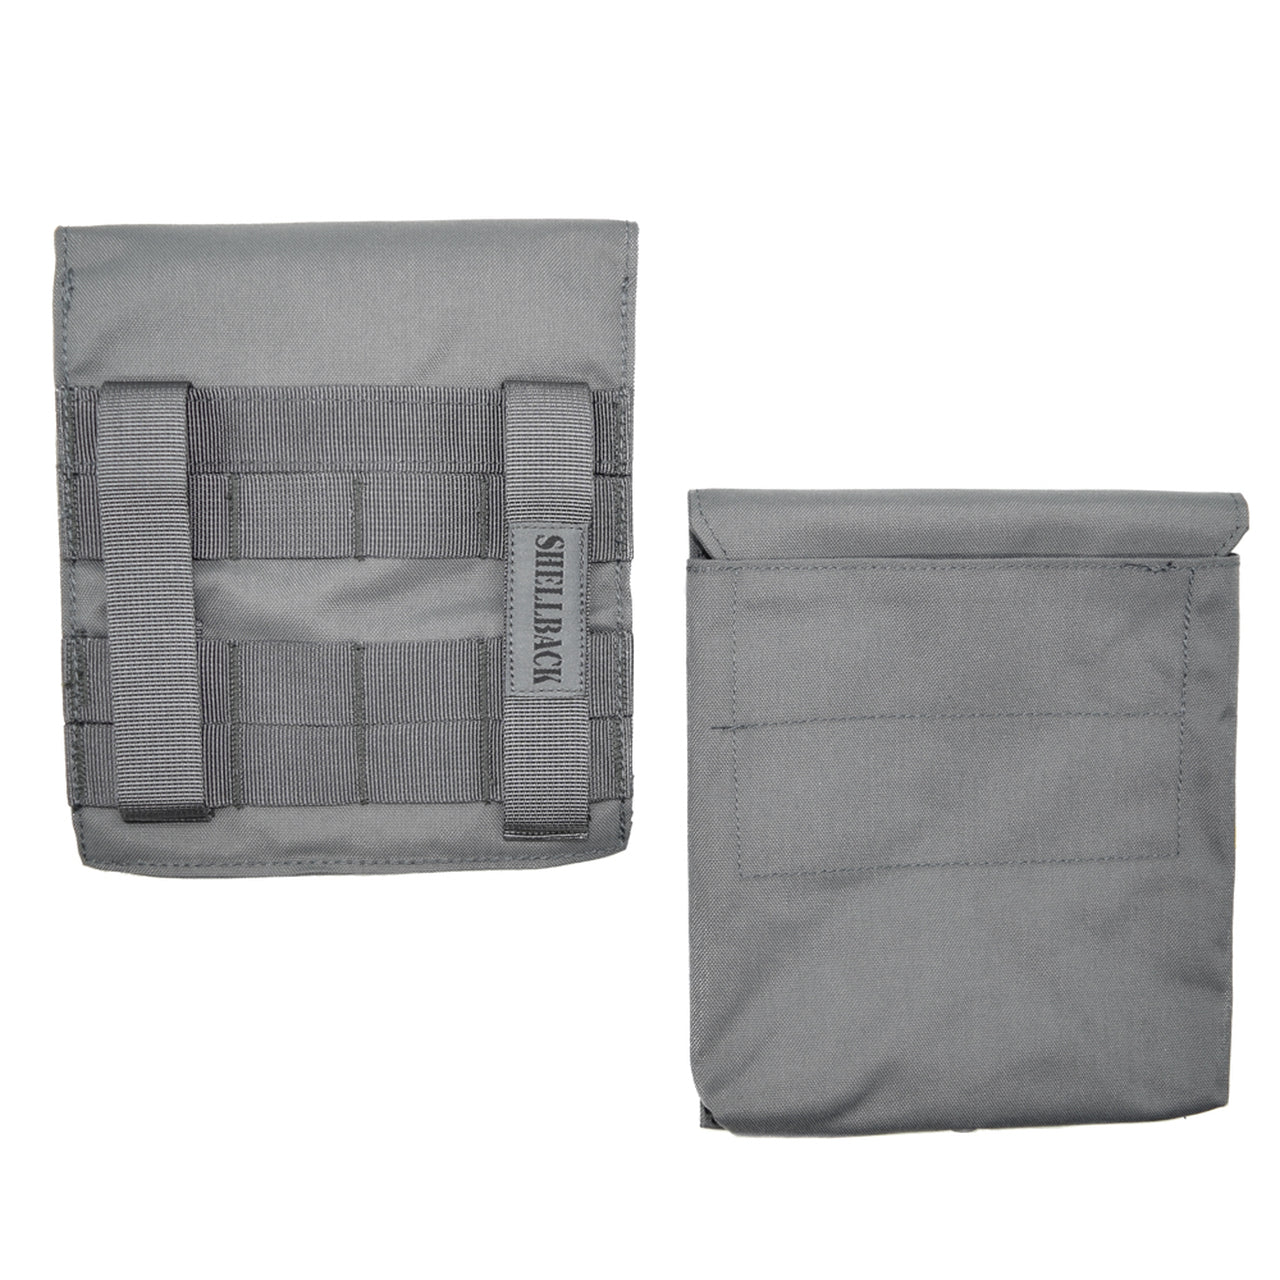 Two Shellback Tactical Side Plate Pockets 2.0 - Set of 2 on a white background.